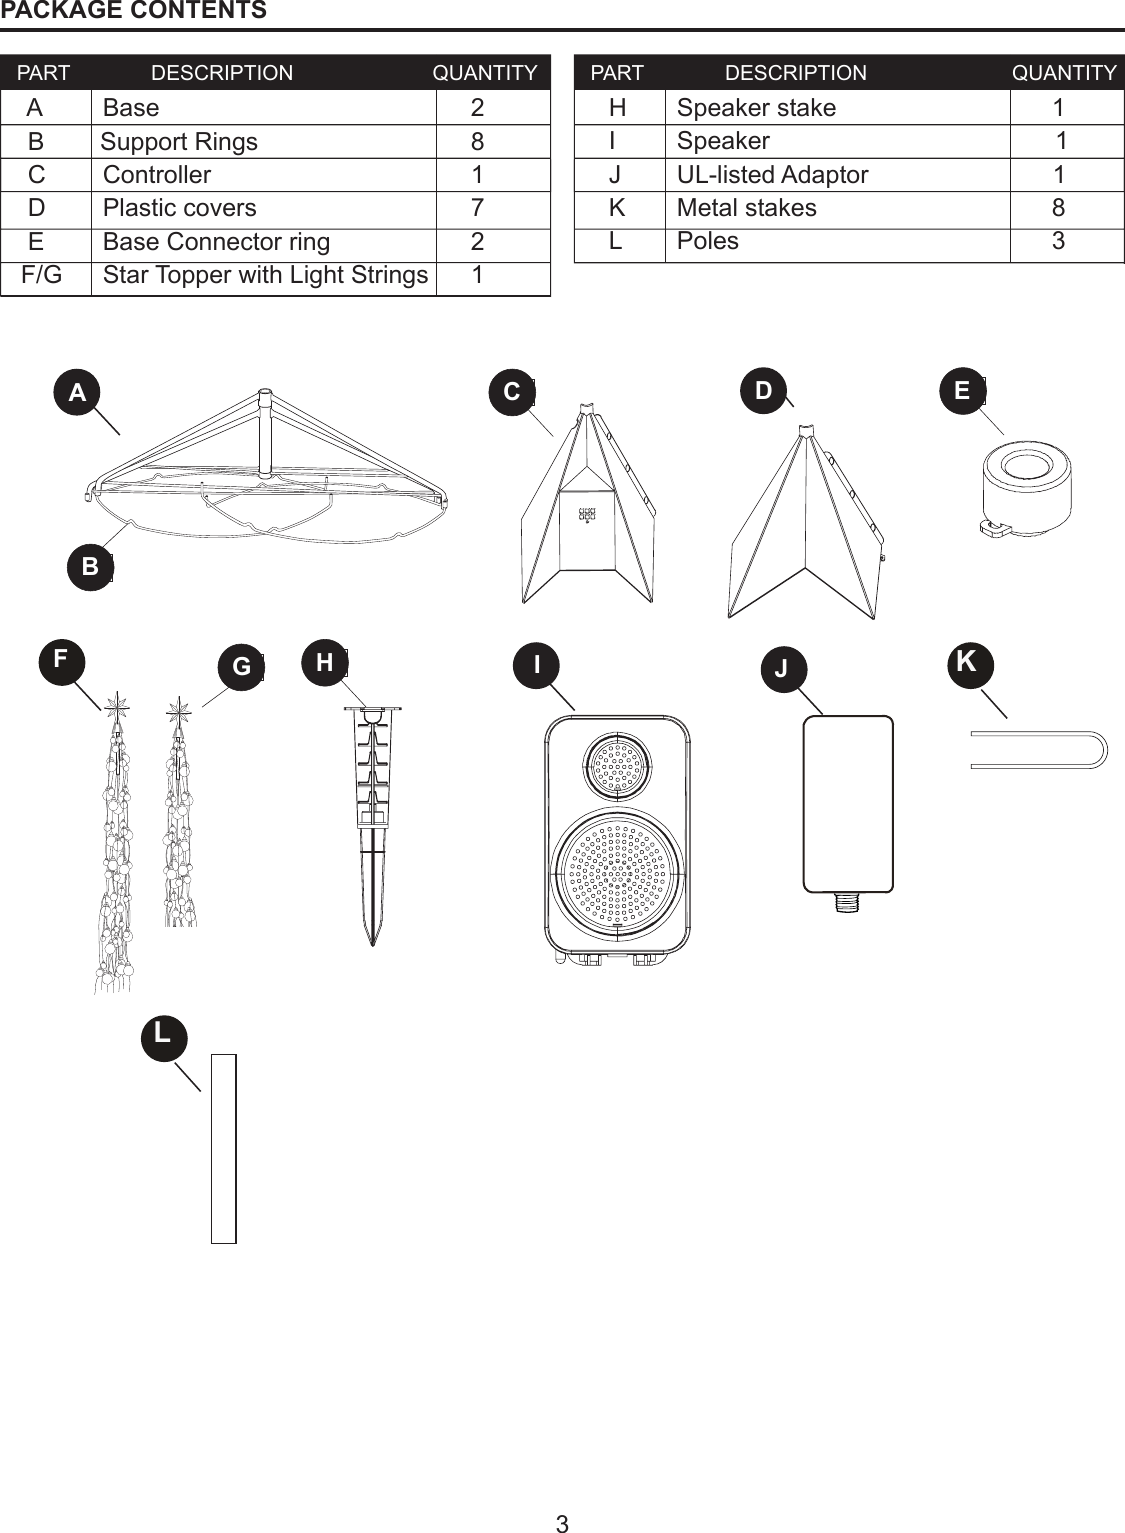 3  PART              DESCRIPTION                        QUANTITY   PART              DESCRIPTION                         QUANTITY    A       Base           2      B        Support Rings          8     C      Controller           1     D      Plastic covers         7     E      Base Connector ring           2    F/G      Star Topper with Light Strings     1        H      Speaker stake          1      I      Speaker                                         1      J      UL-listed Adaptor         1      K       Metal stakes                 8      L      Poles            3PACKAGE CONTENTSKF IHJGADCEBL